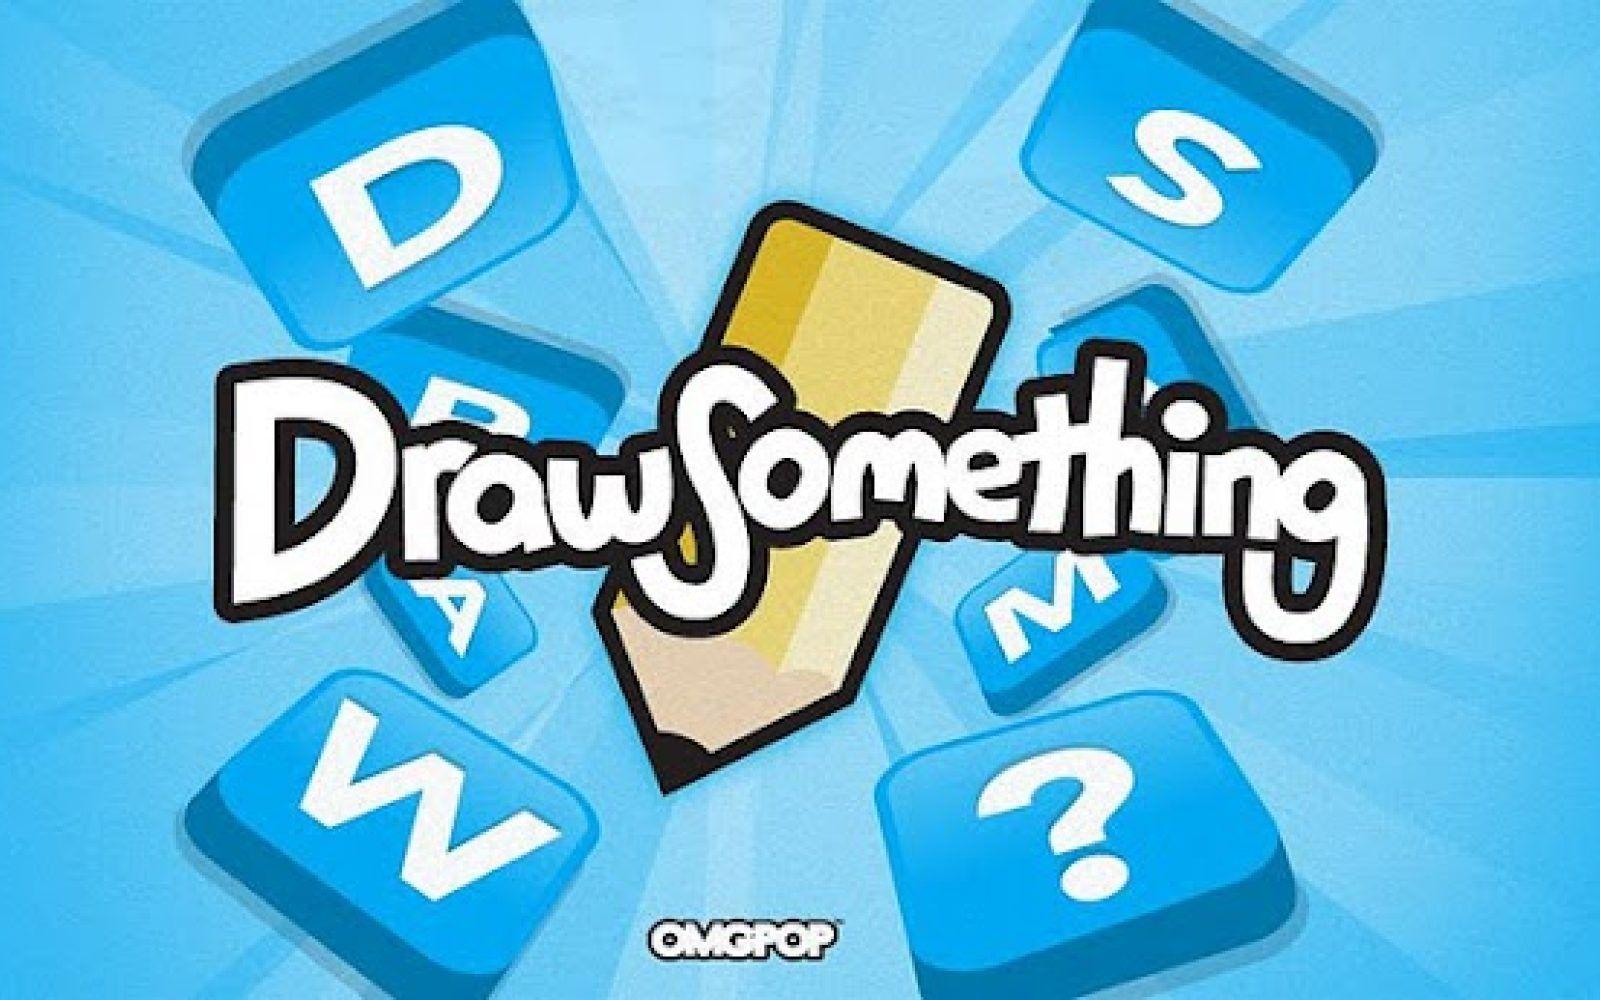 Draw Something App Logo - The No. 1 app on iOS and Android is OMGPOP's 'Draw Something' - 9to5Mac